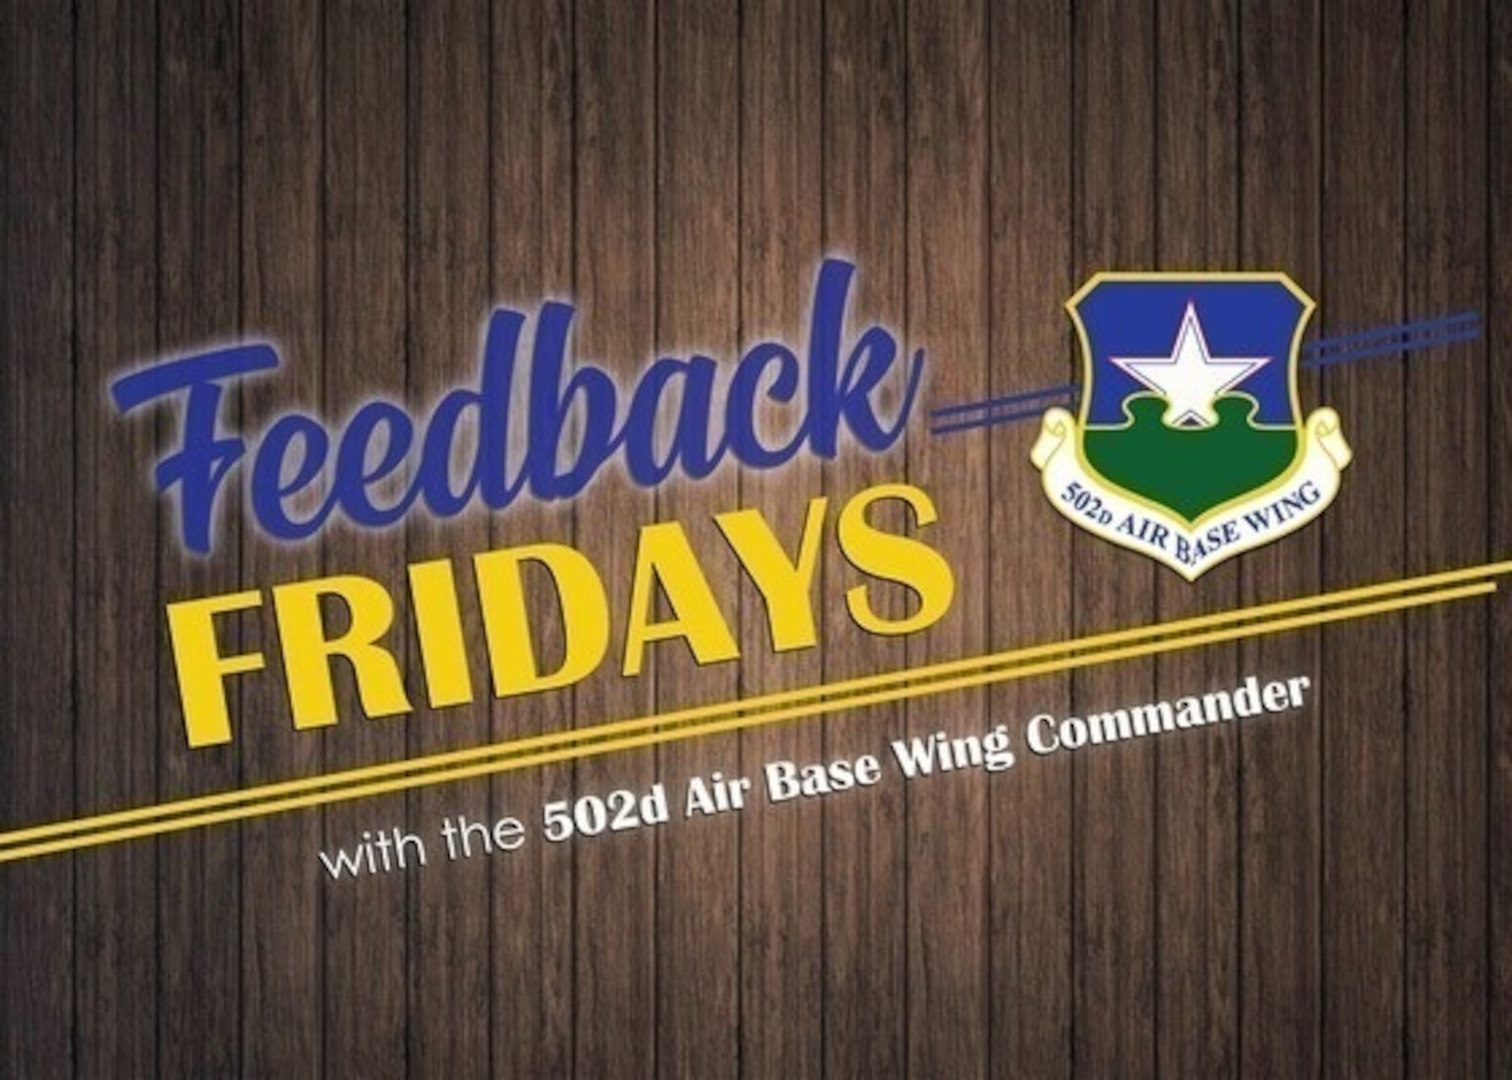 If you have a question or concern, please send an email to jbsapublicaffairs@gmail.com using the subject line “Feedback Fridays.” Questions will be further researched and published as information becomes available.